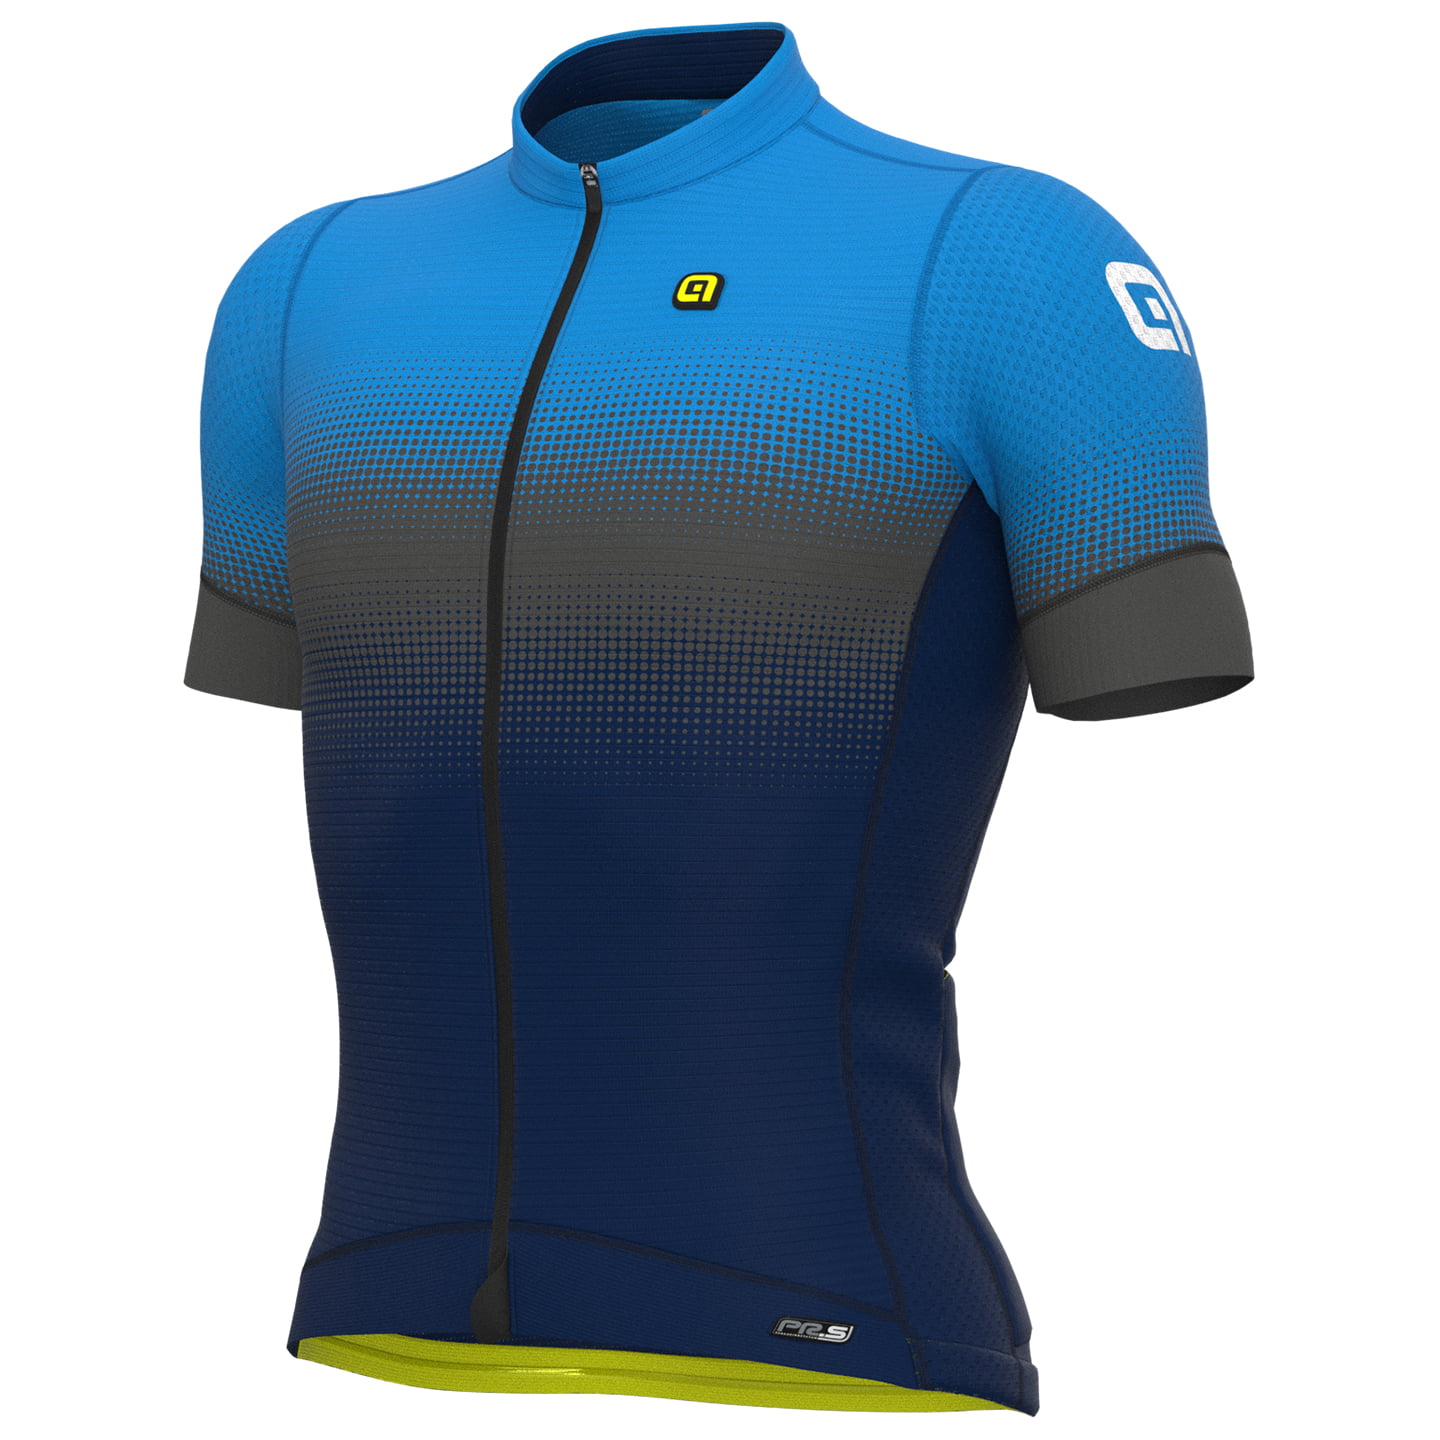 ALE Gradient Short Sleeve Jersey Short Sleeve Jersey, for men, size M, Cycling jersey, Cycling clothing